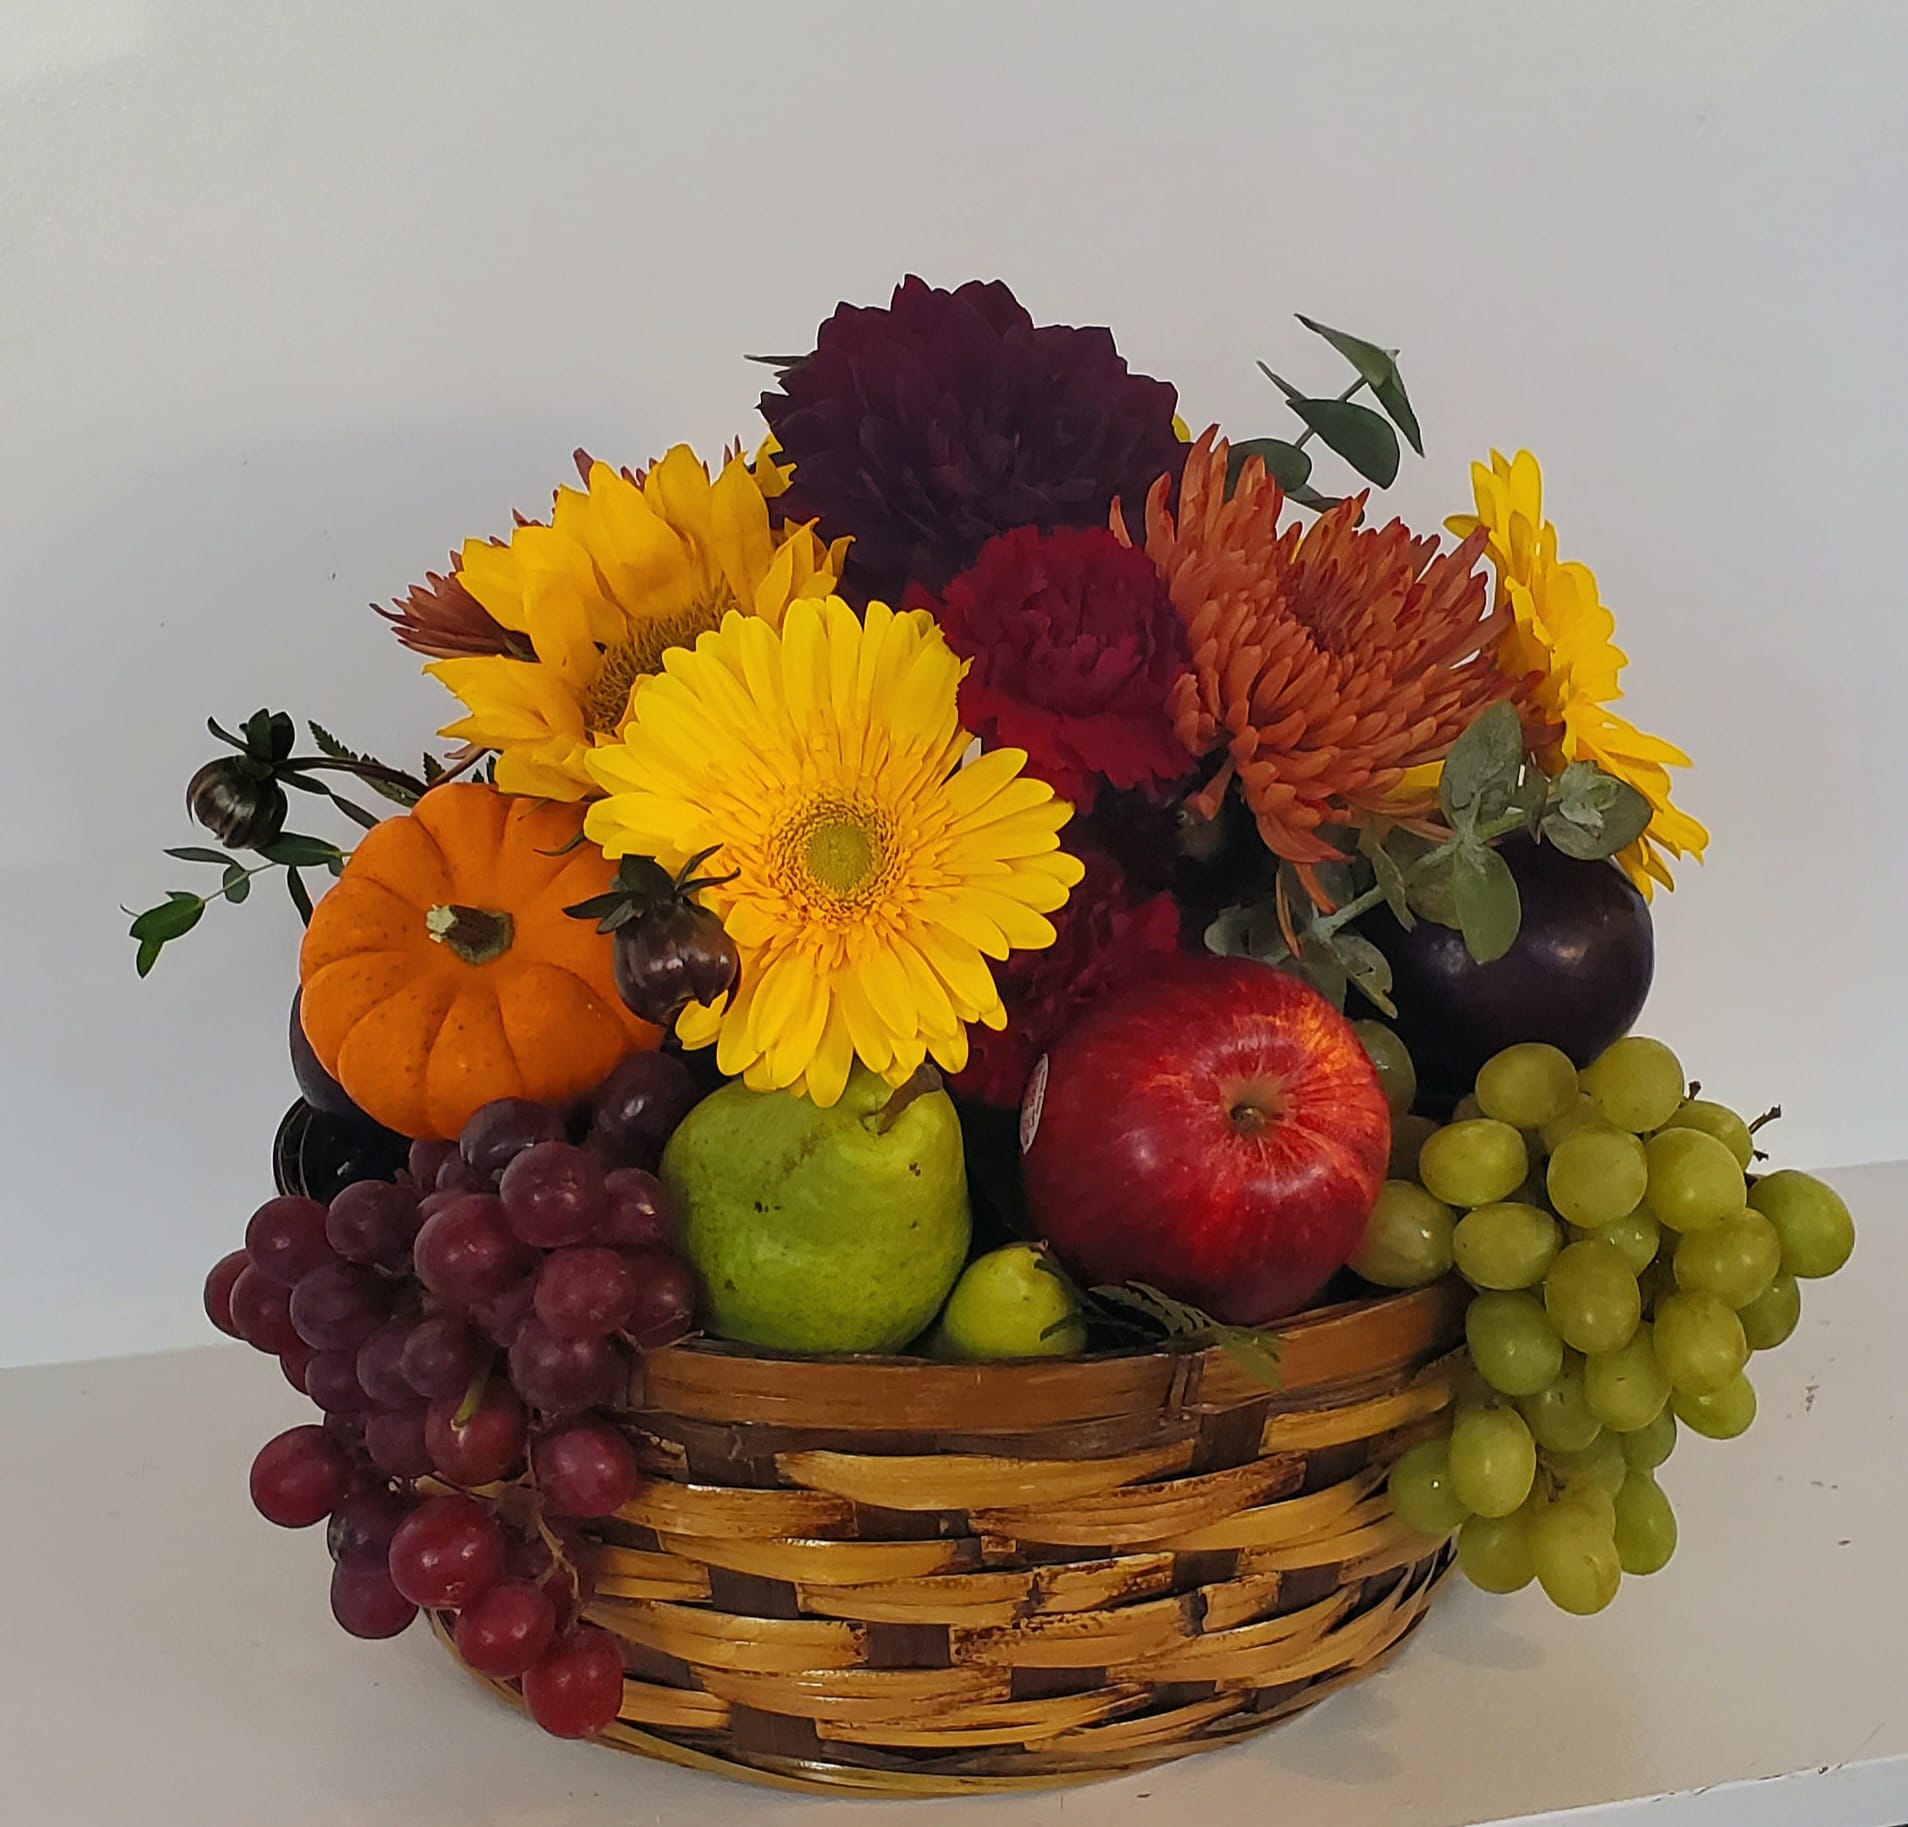 Duntroon Fruits and Flowers Basket